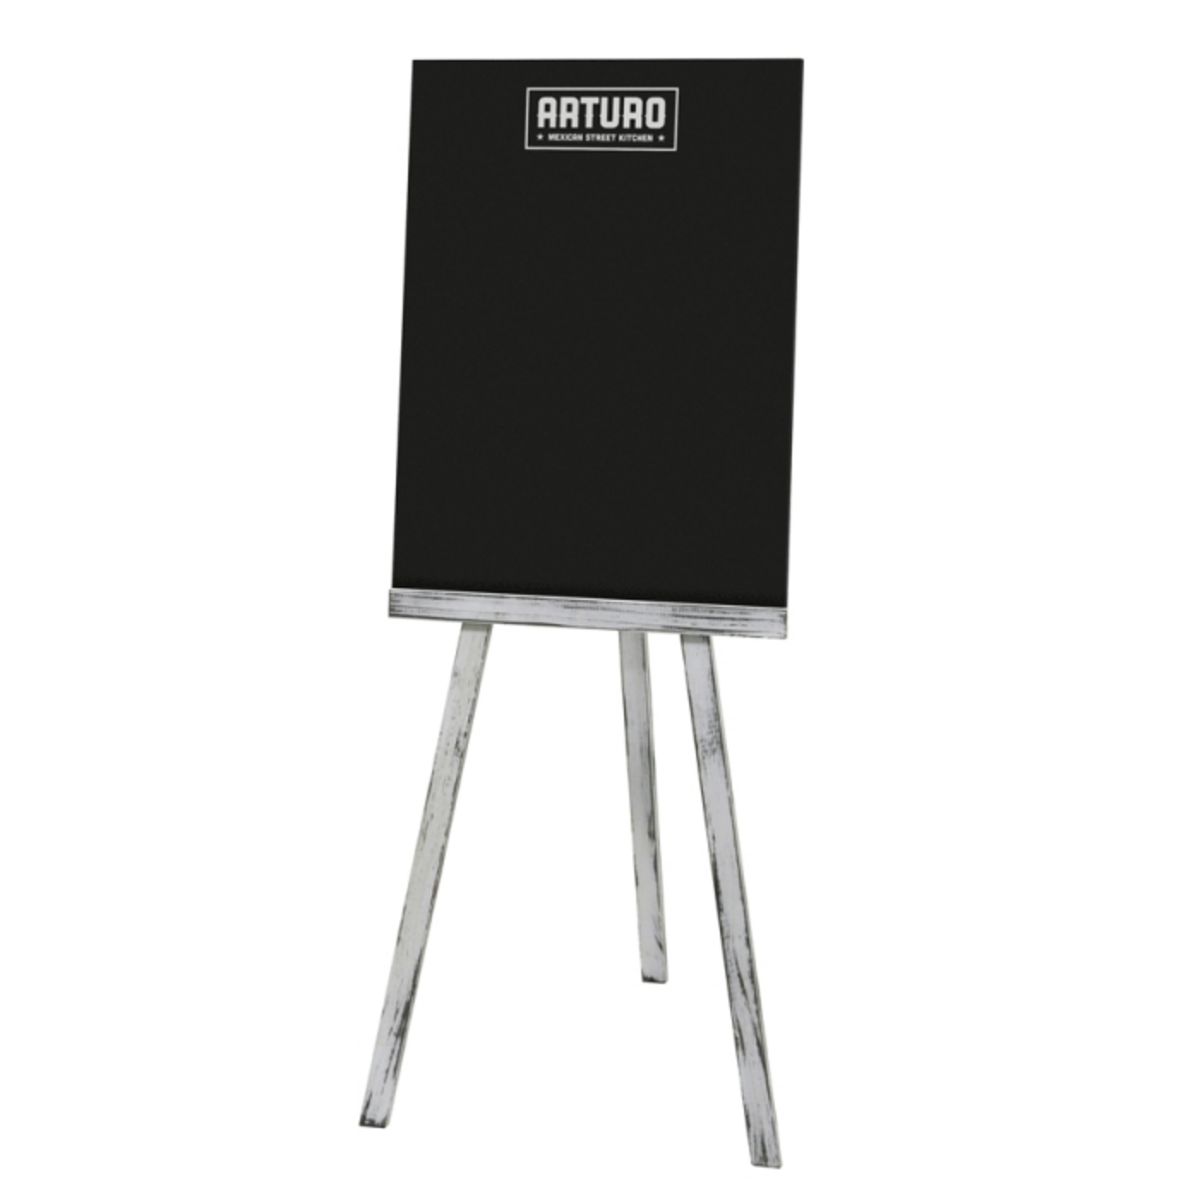 Distressed Effect White Easel with Branded Chalkboard.png